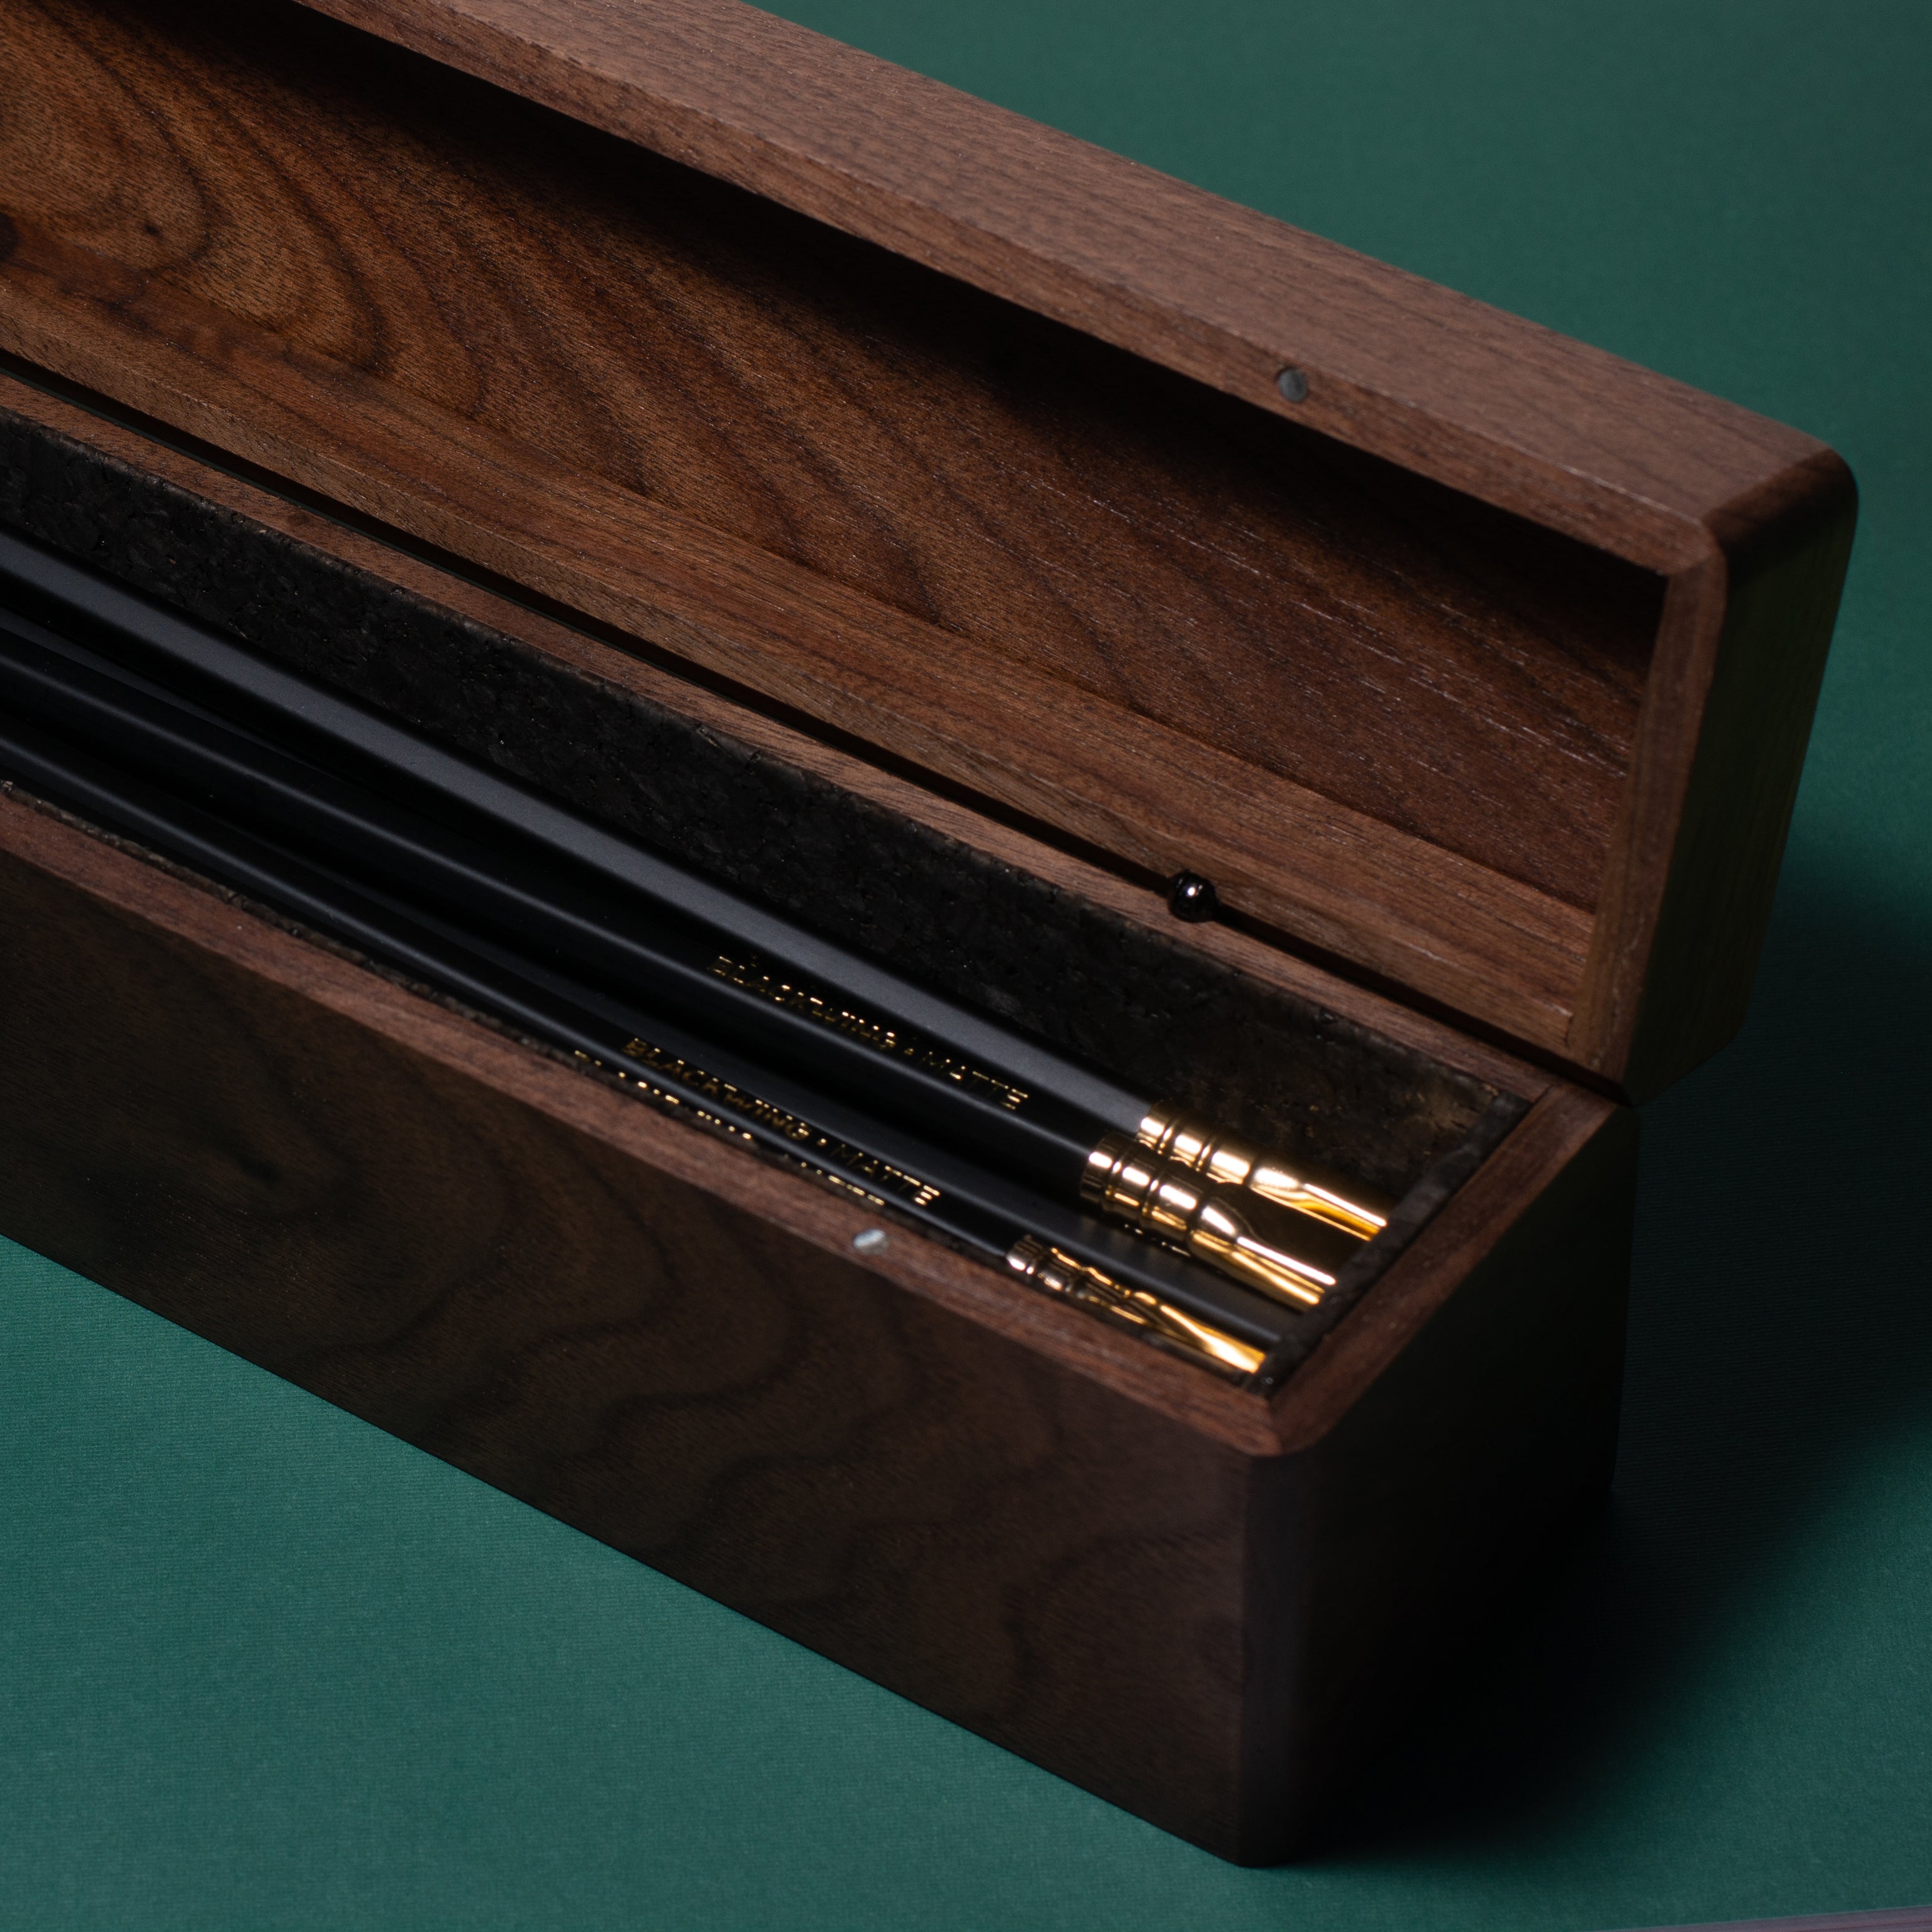 A Blackwing Walnut Box containing Blackwing pencils rests on the green surface.